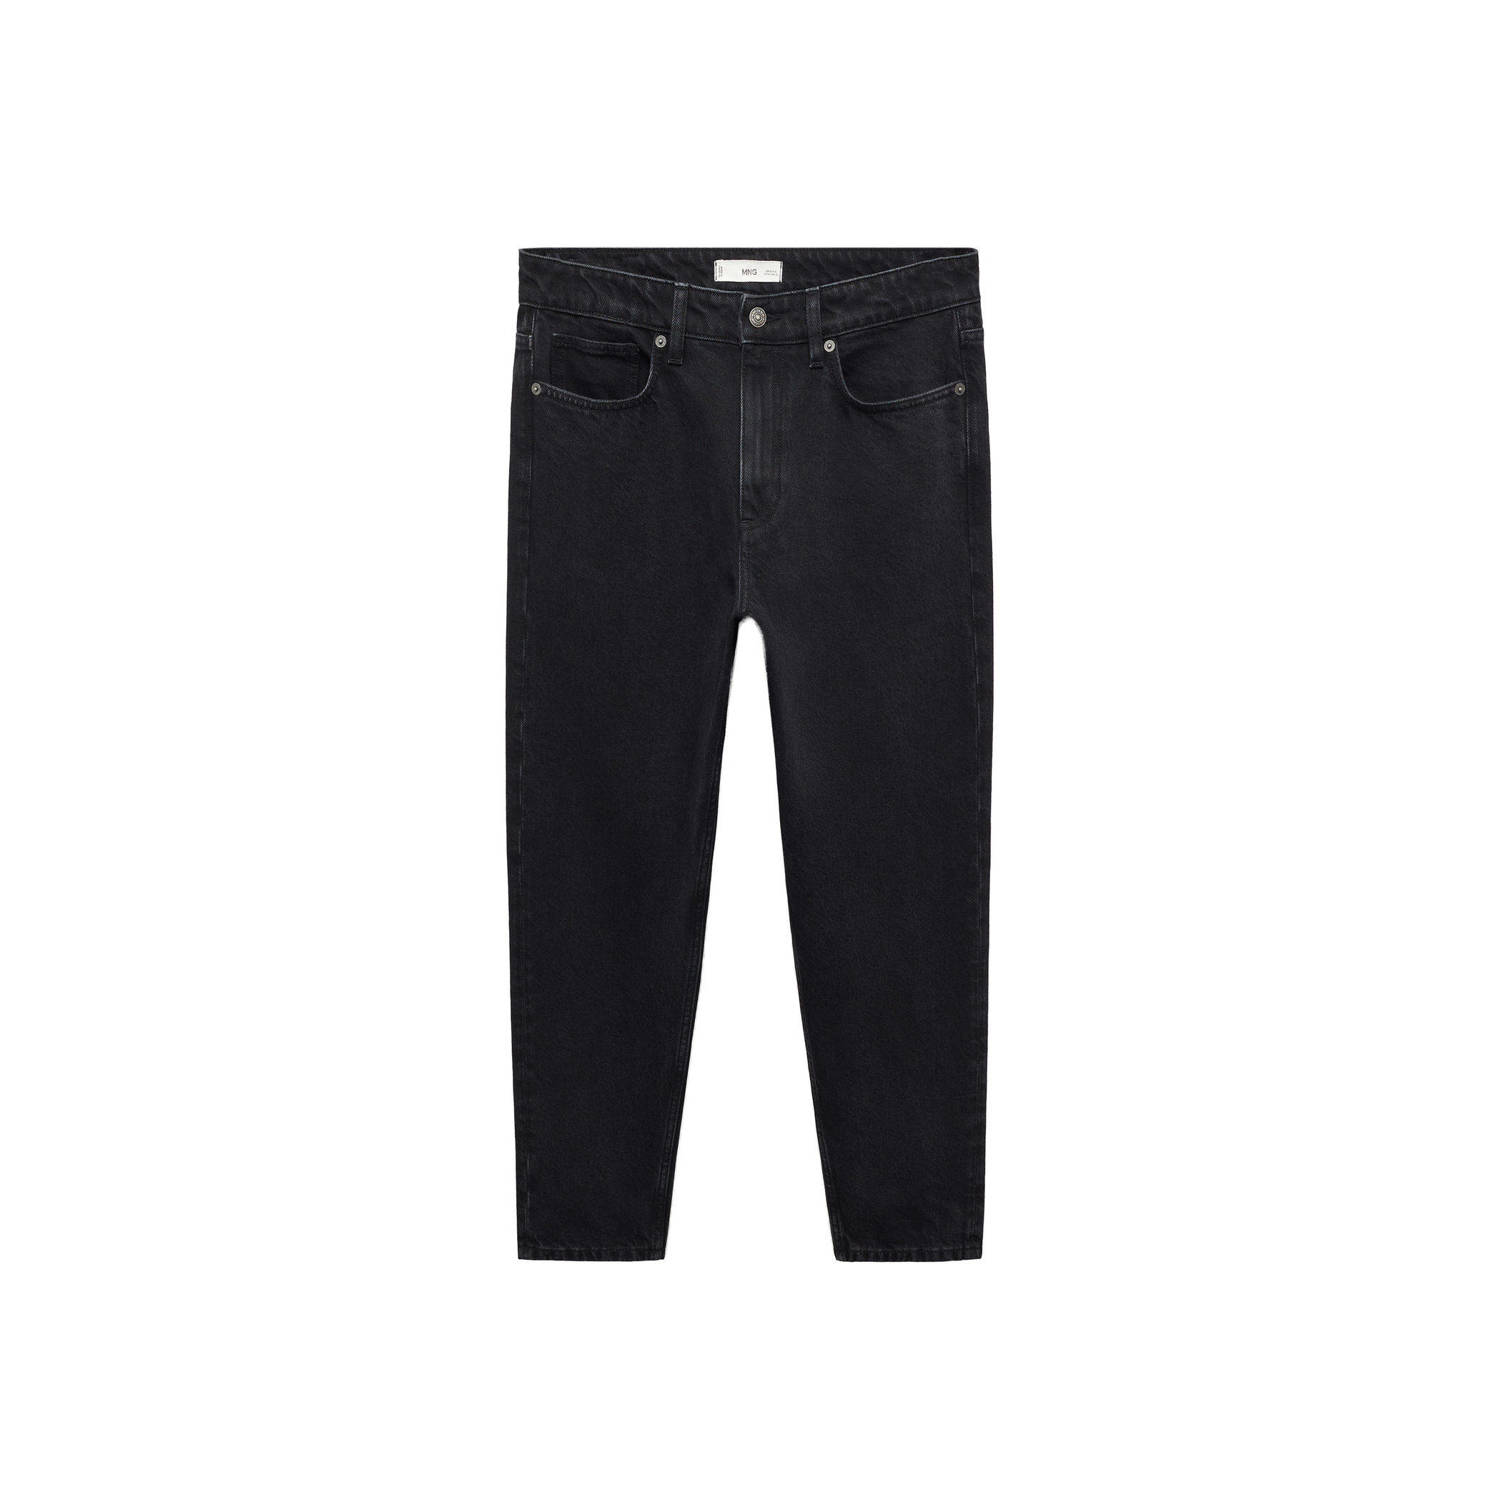 Mango Man tapered fit jeans changeant black